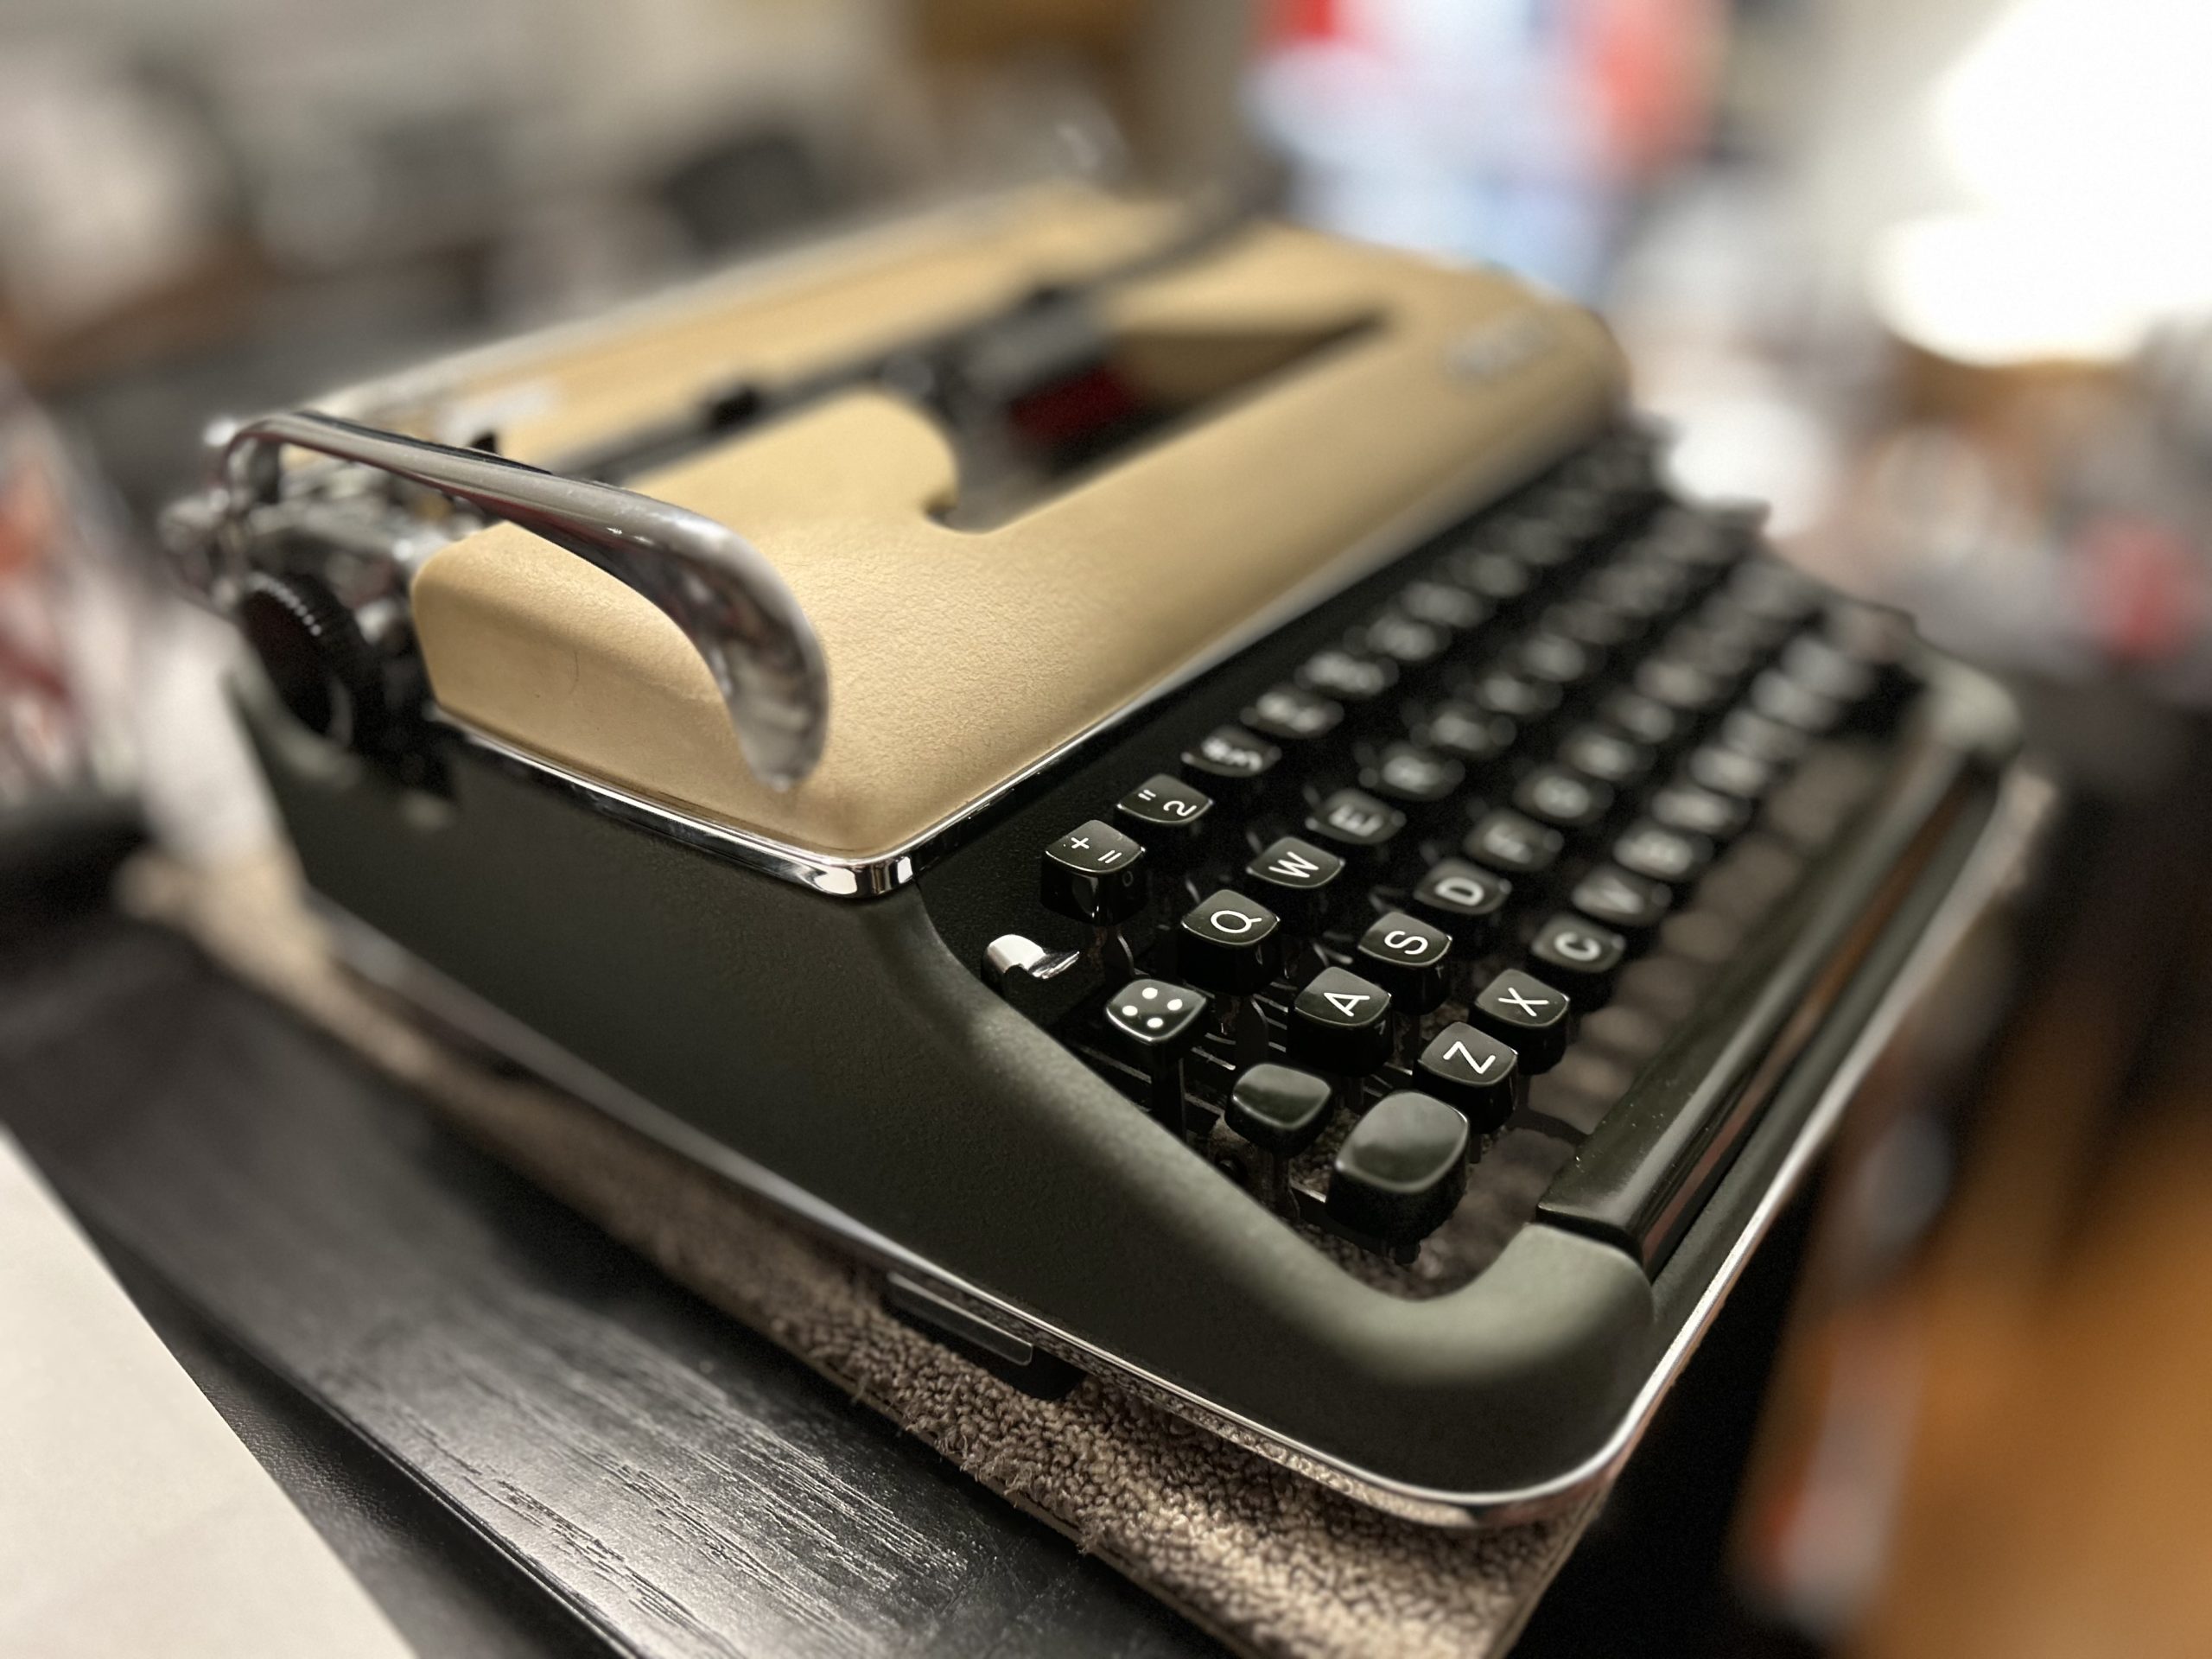 Photo of a 1957 Olympia SM3 manual typewriter in two-tone paint scheme of tan/green